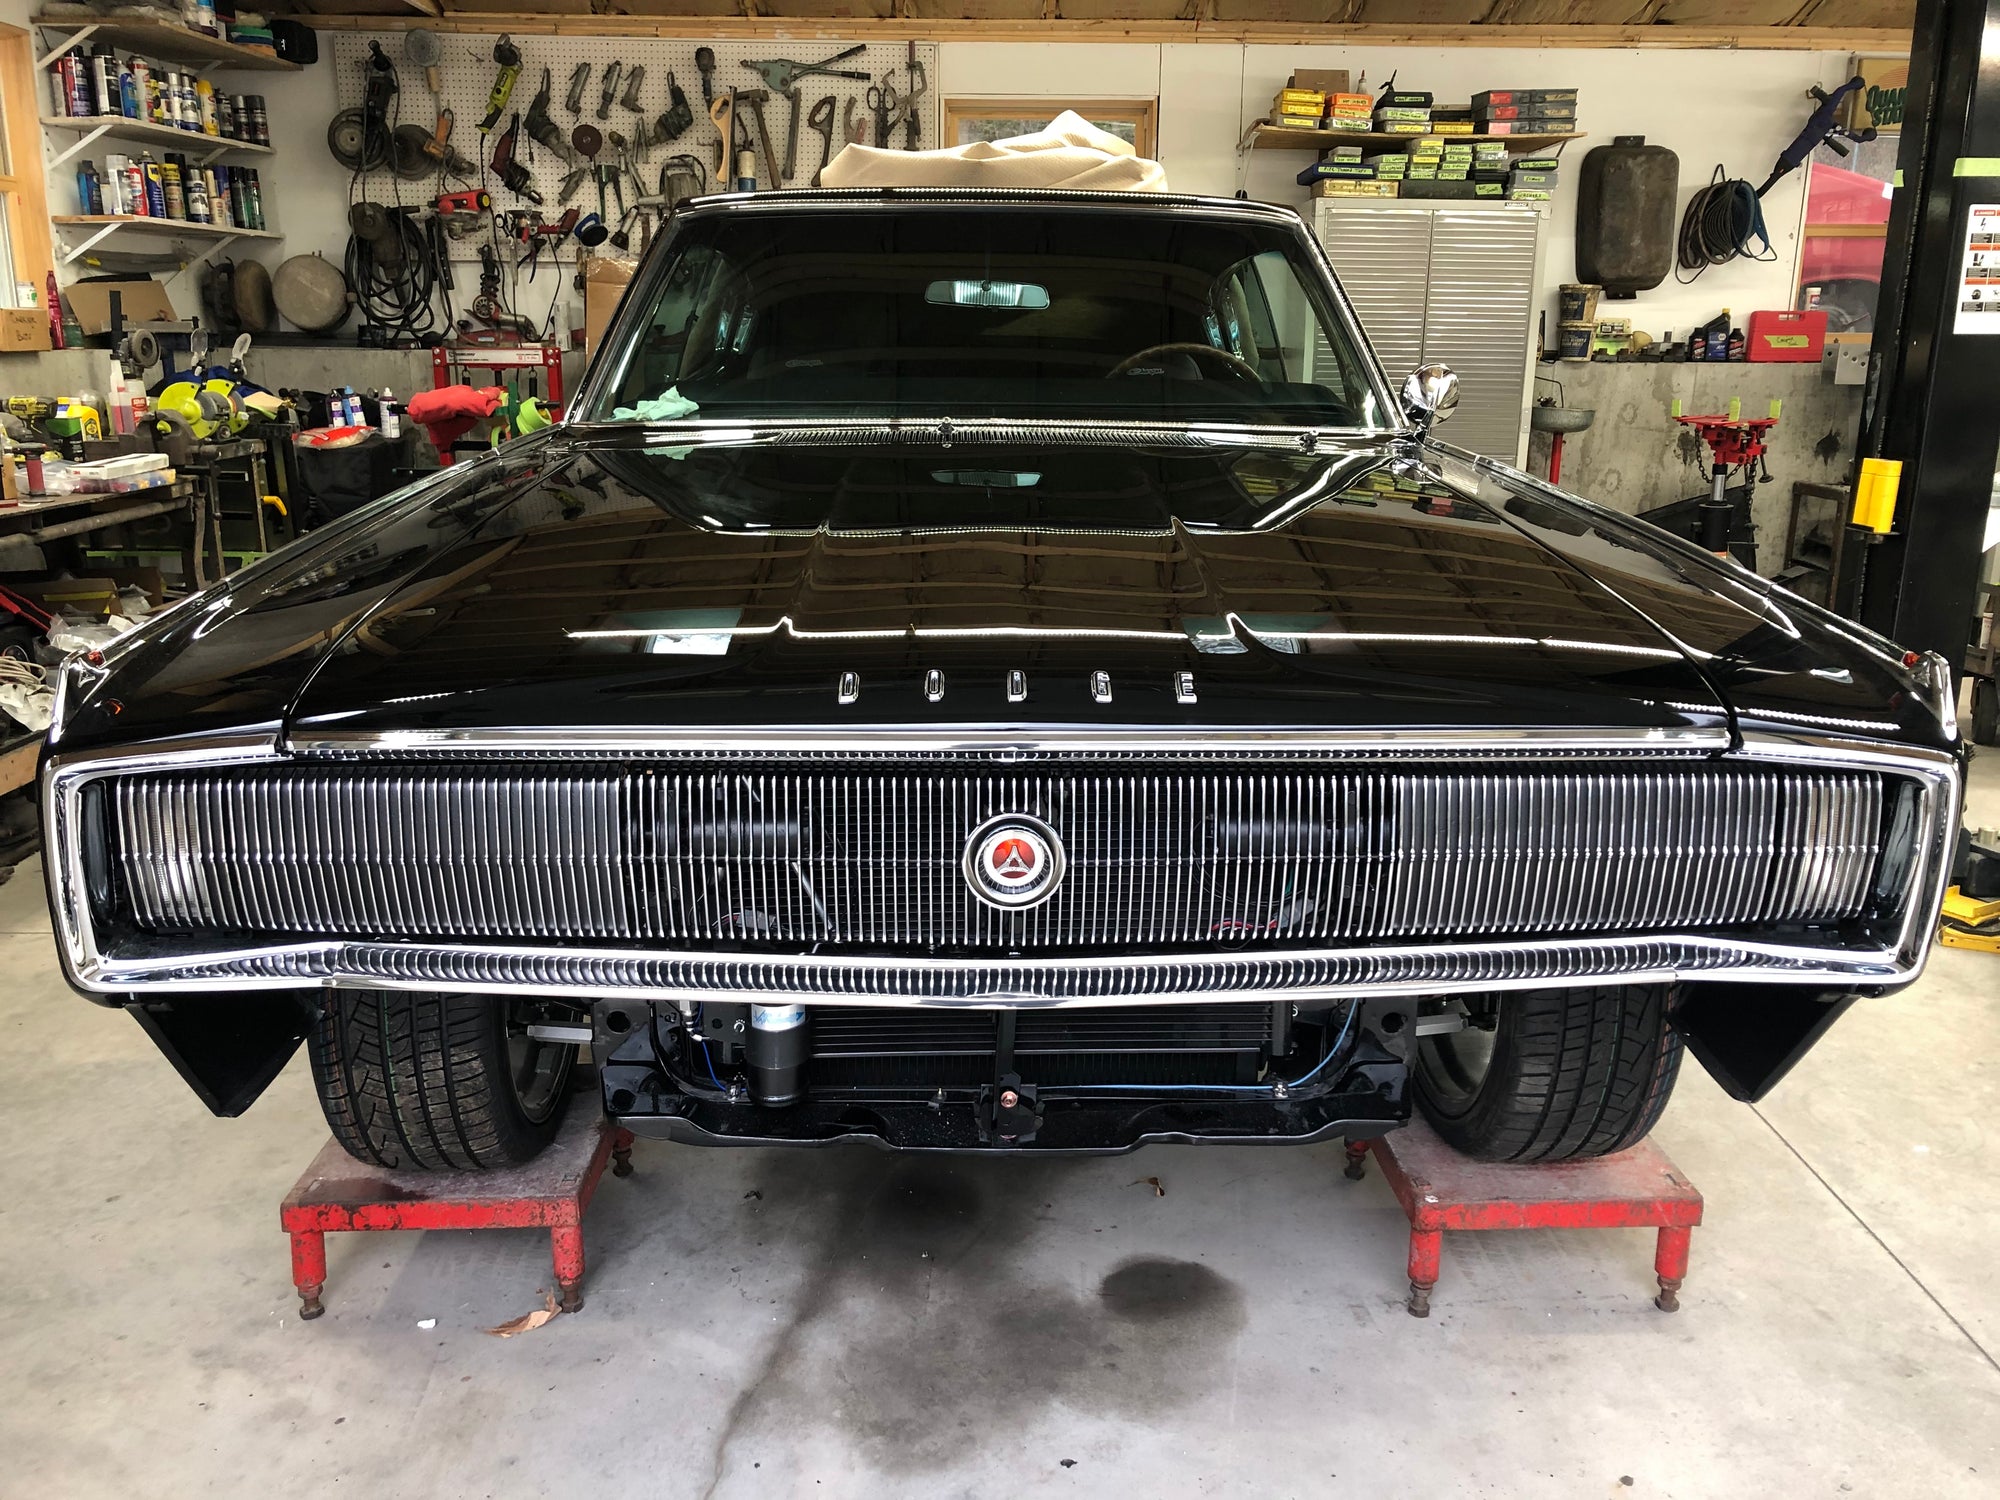 66-67 Charger How The Headlamps Work?